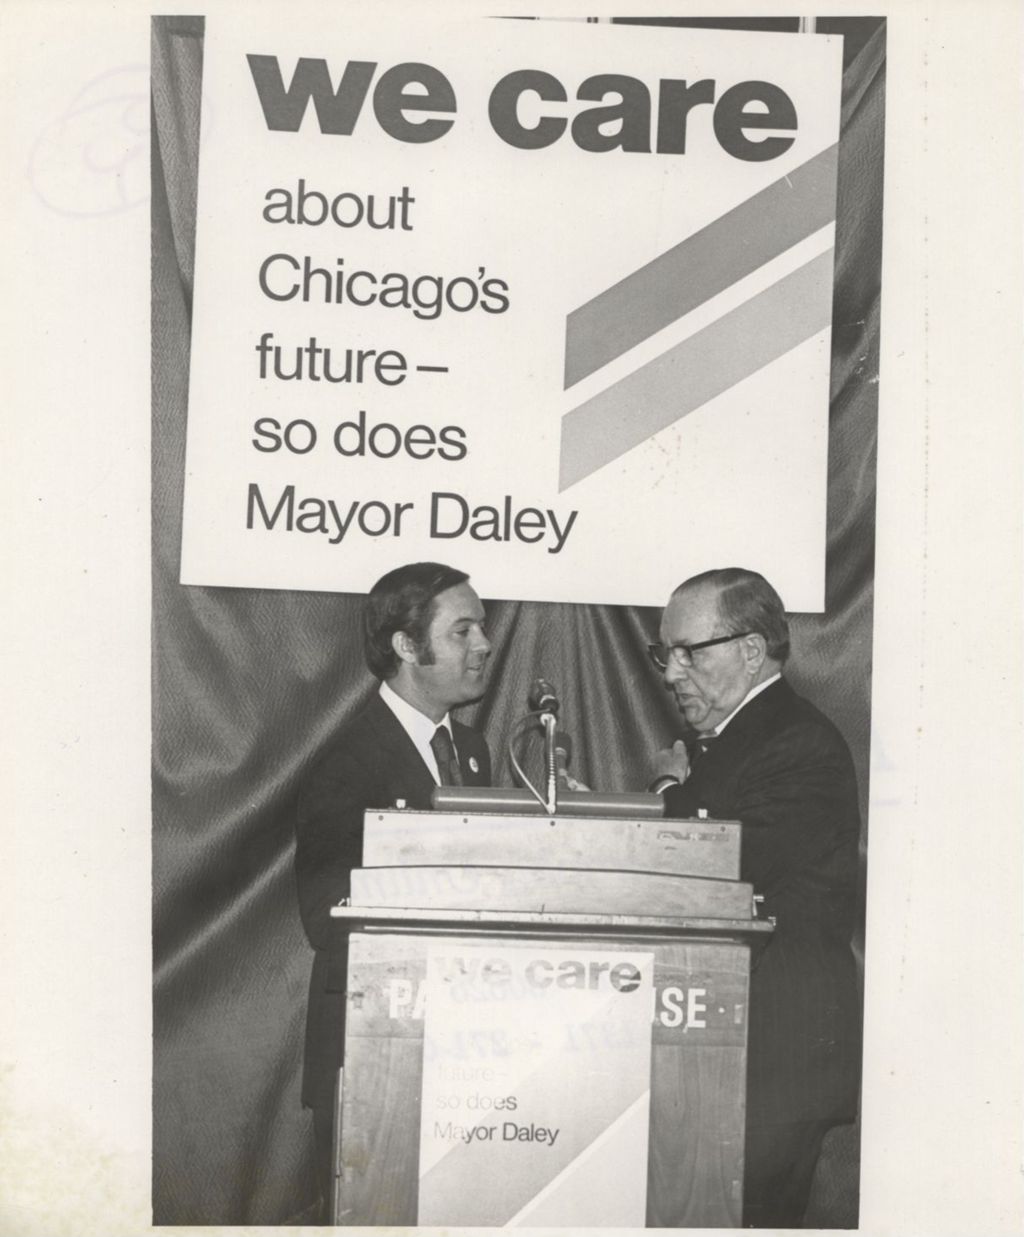 Miniature of Richard J. Daley behind a podium at a "We Care" event